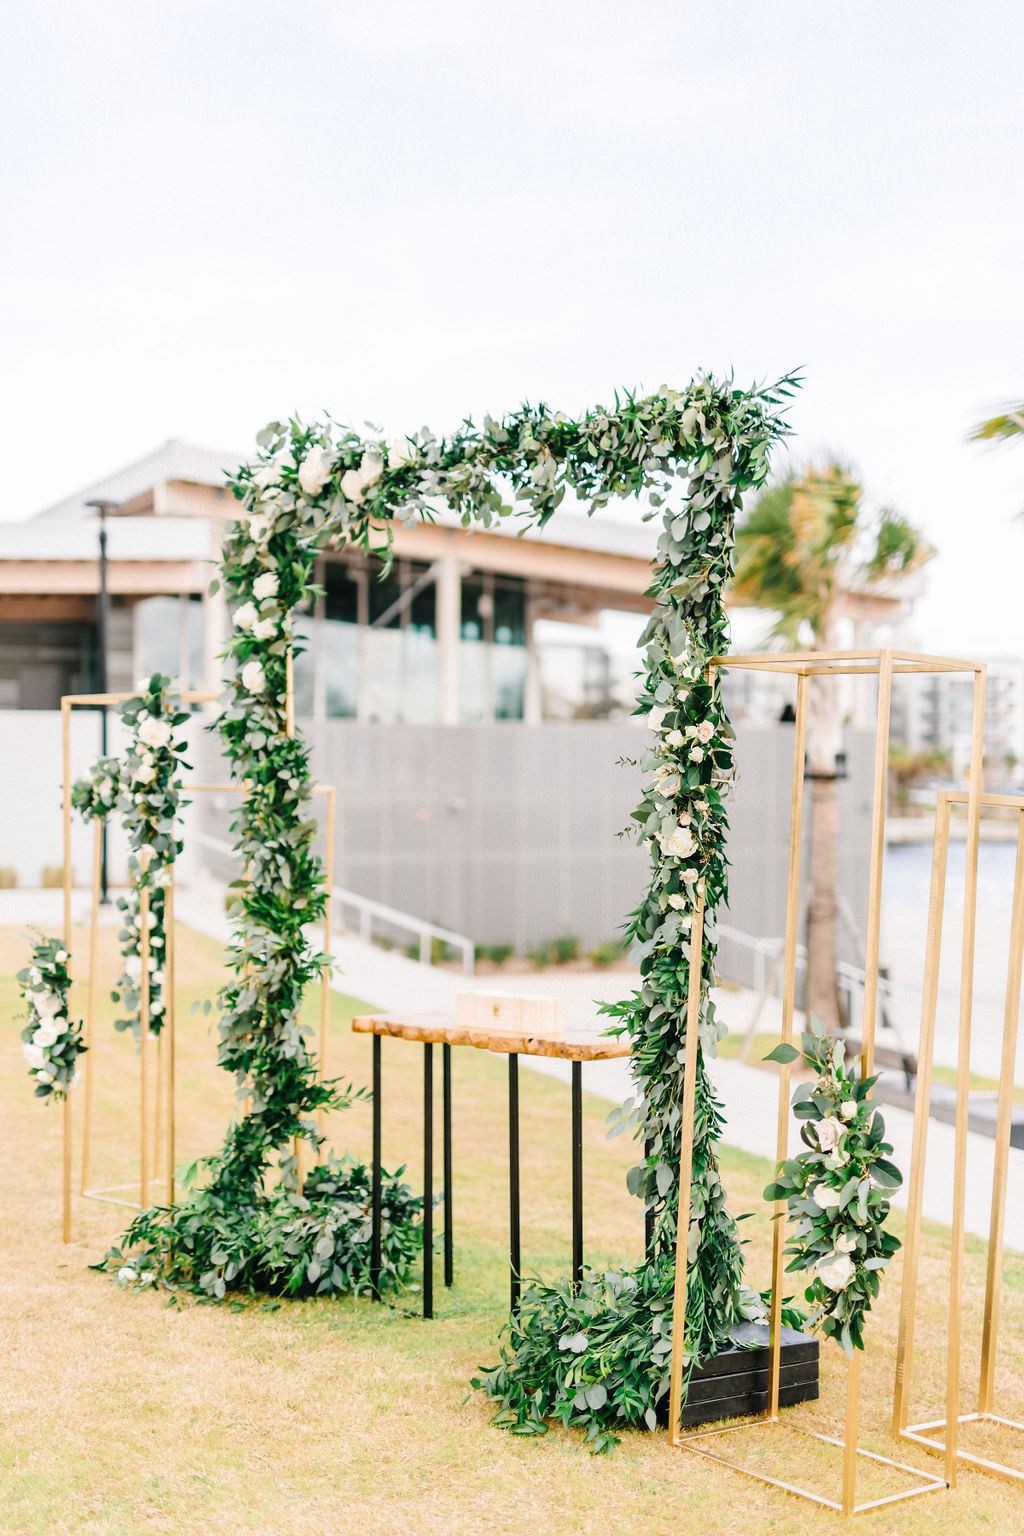 Elegant Tampa Bay Waterfront Wedding Ceremony and Decor, Timeless Garden Inspired Decorations with Greenery Garland Arch, Gold Modern Accents, White, Ivory and Blush Pink Florals, Outdoor on Hillsborough River with Downtown's Skyline in Backdrop, Tampa River Center | Florida Wedding Planner UNIQUE Weddings and Events